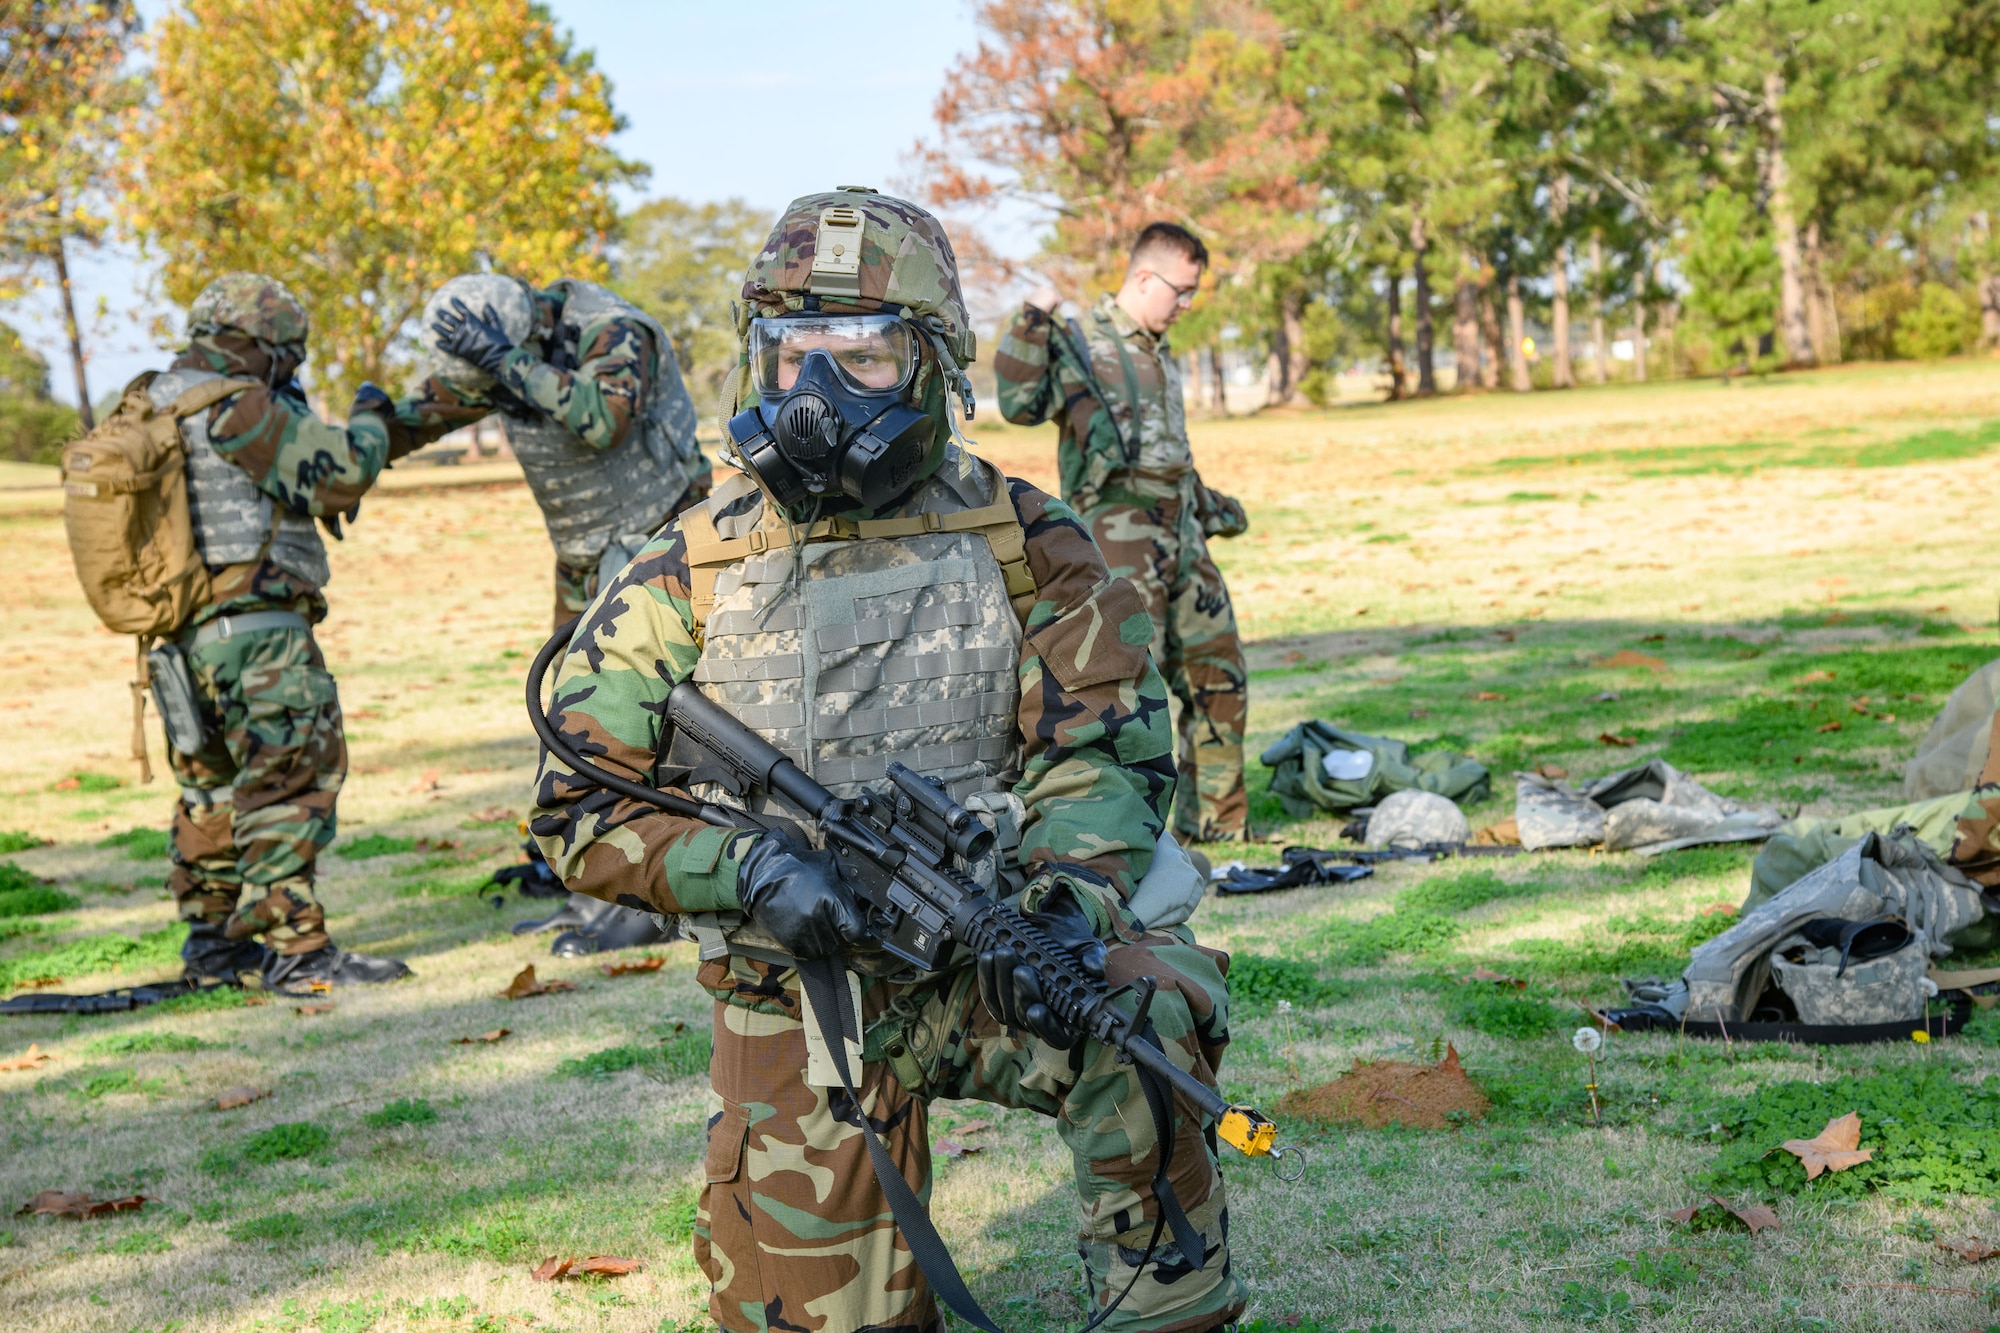 Airmen dressed in level 4 Mission Oriented Protective Posture gear at Maxwell Air Force Base, December 8, 2022. The exercise focused on training for the next fight and preparing Airmen to support different functional areas within the Mission Support Group.